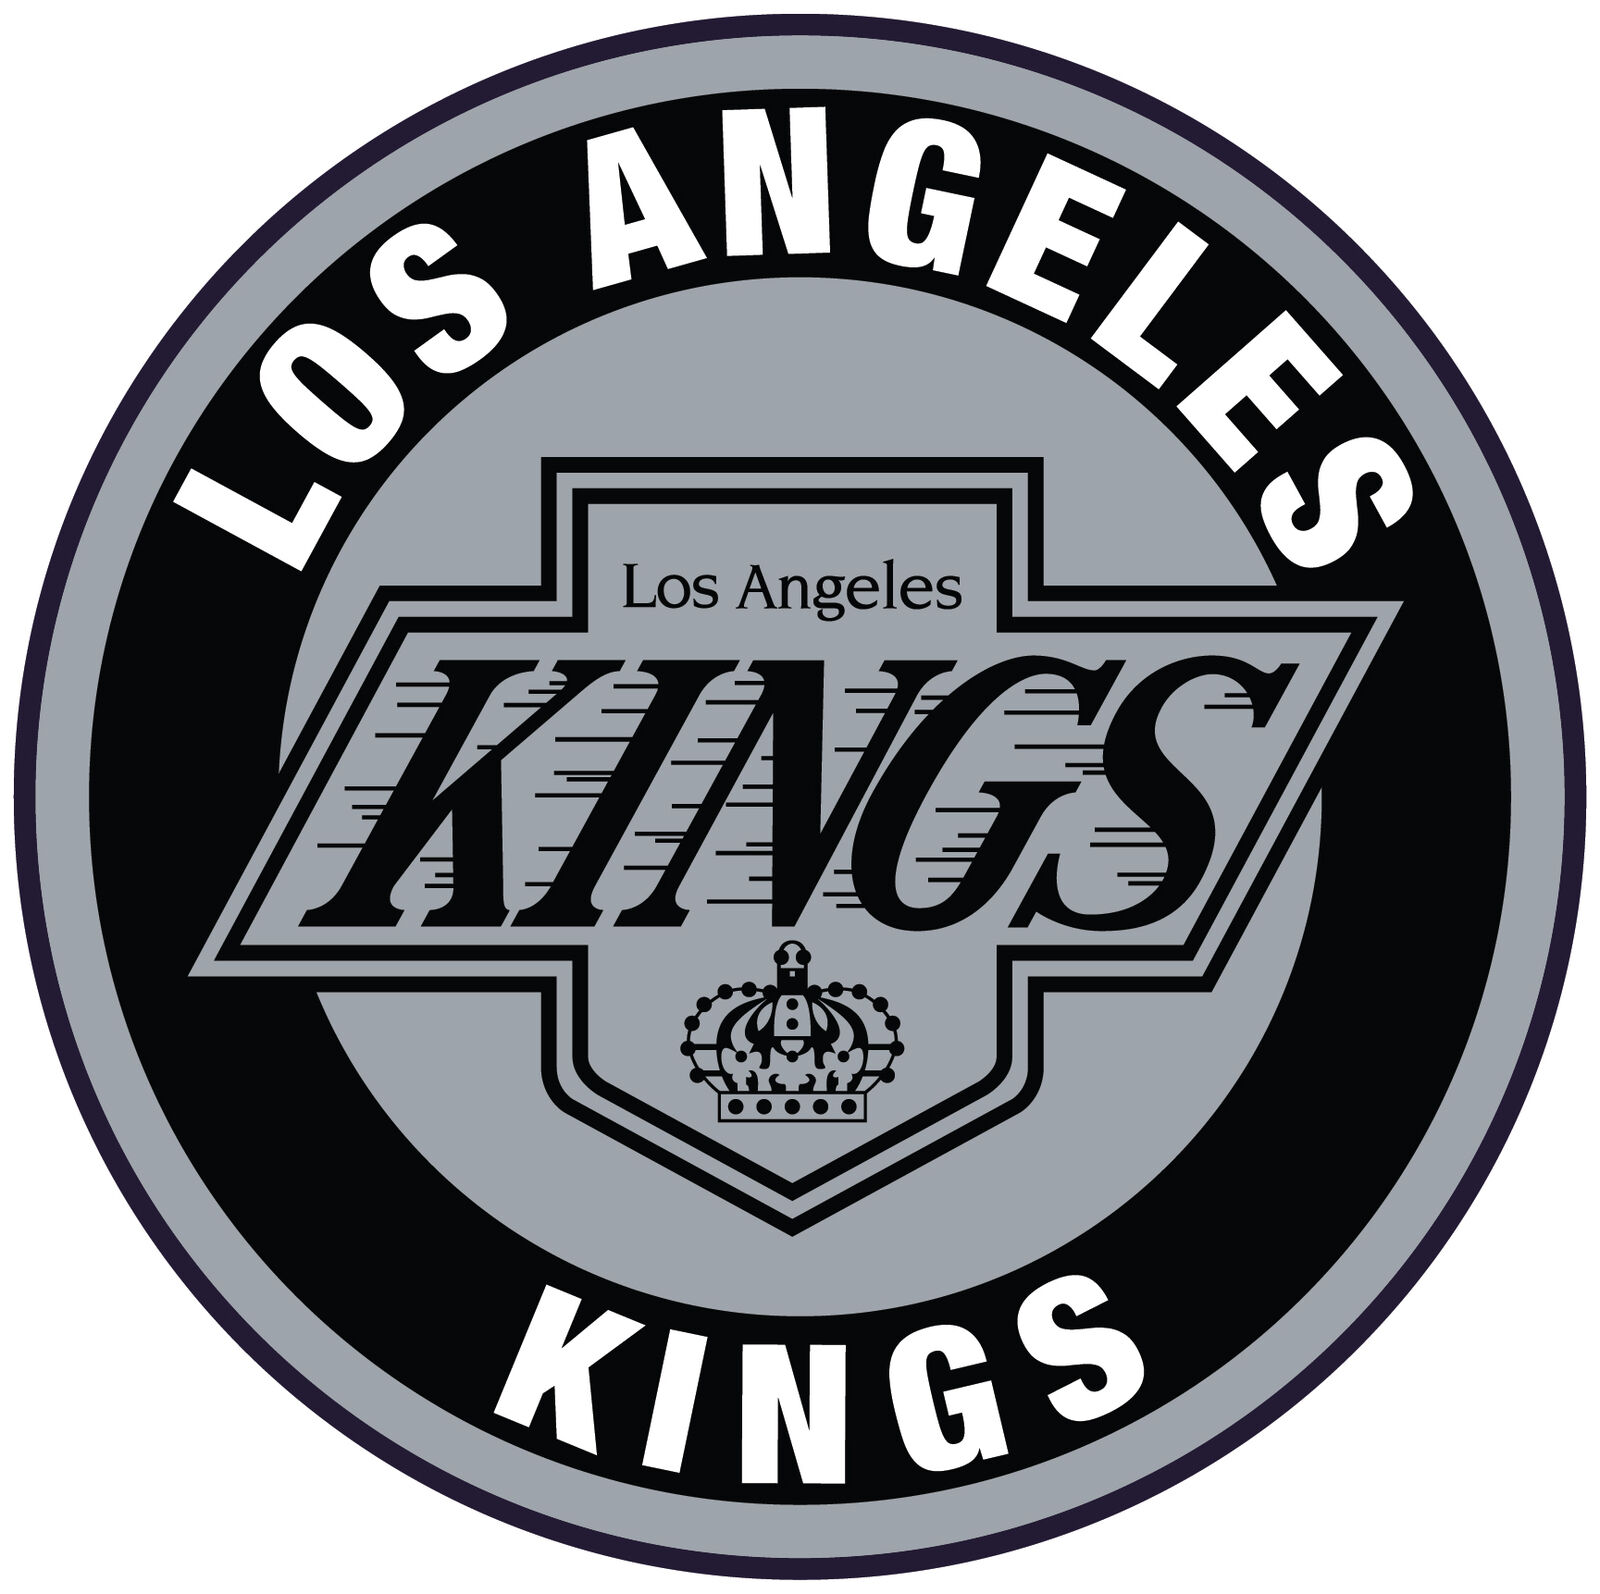 Los Angeles Kings Throwback Circle Sticker / Vinyl Decal 10 Sizes TRACKING